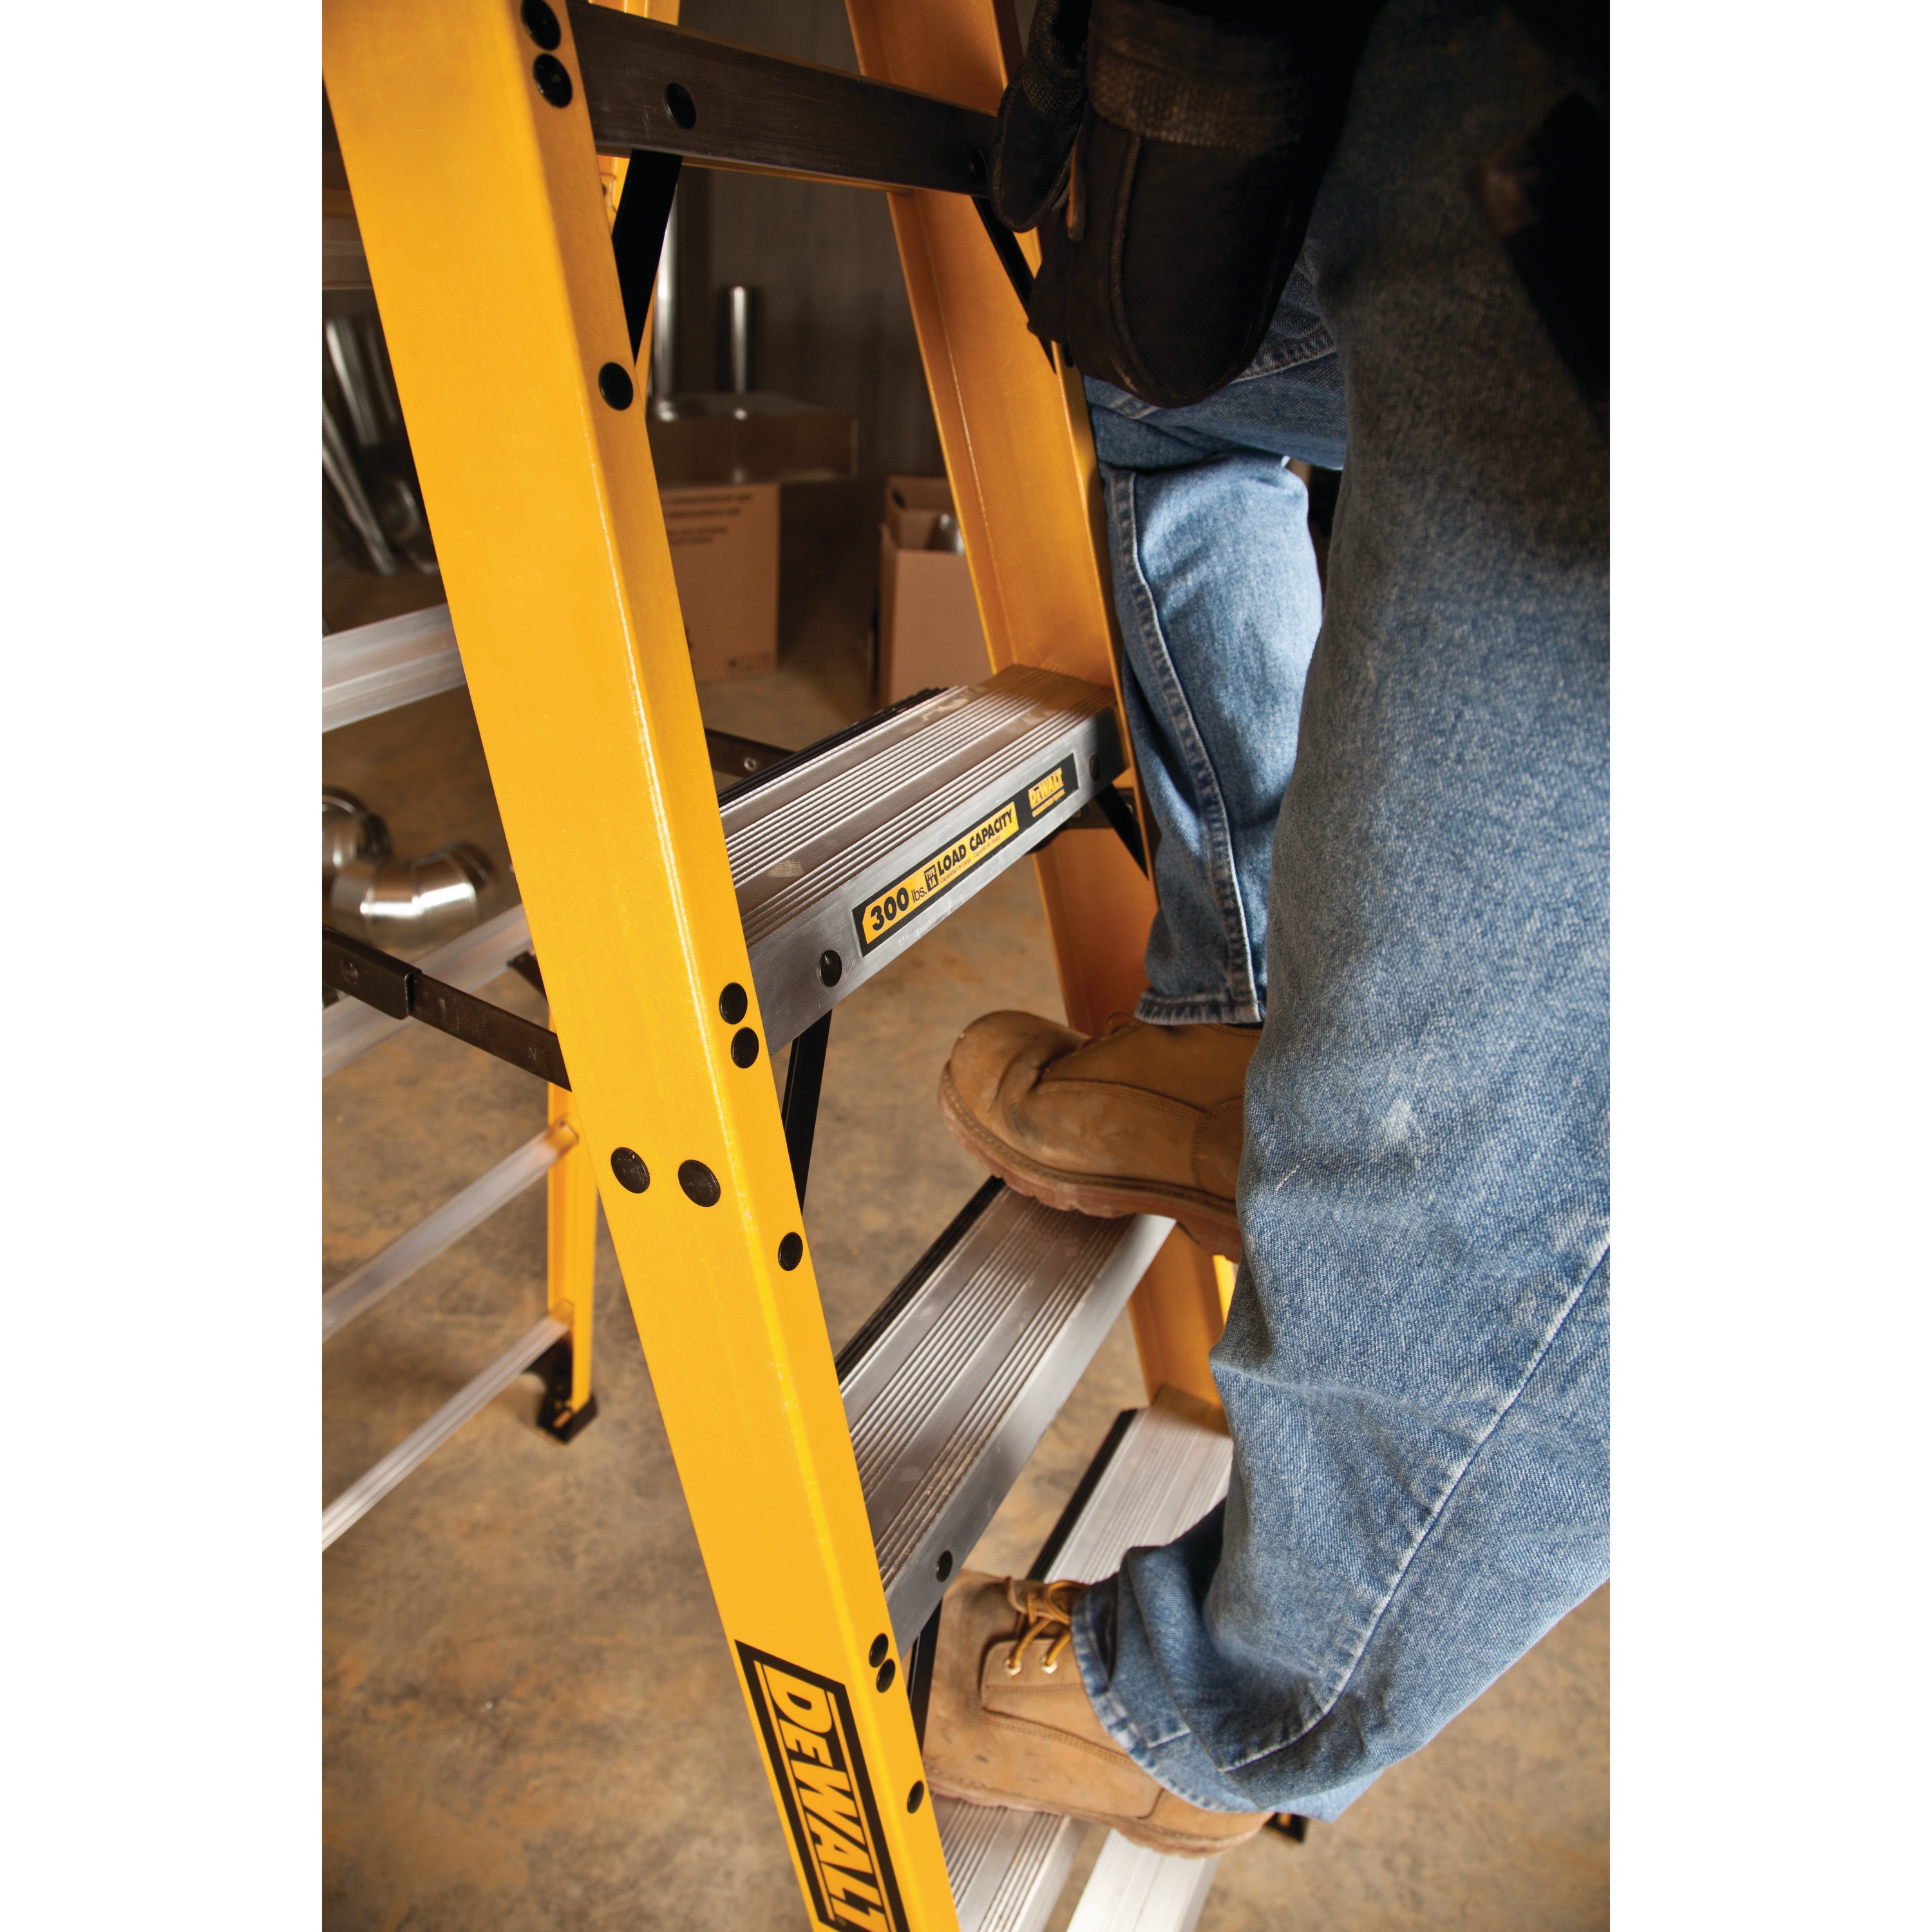 Greater step surface feature of 10 foot Fiberglass Step Ladder 300 pound Load Capacity.